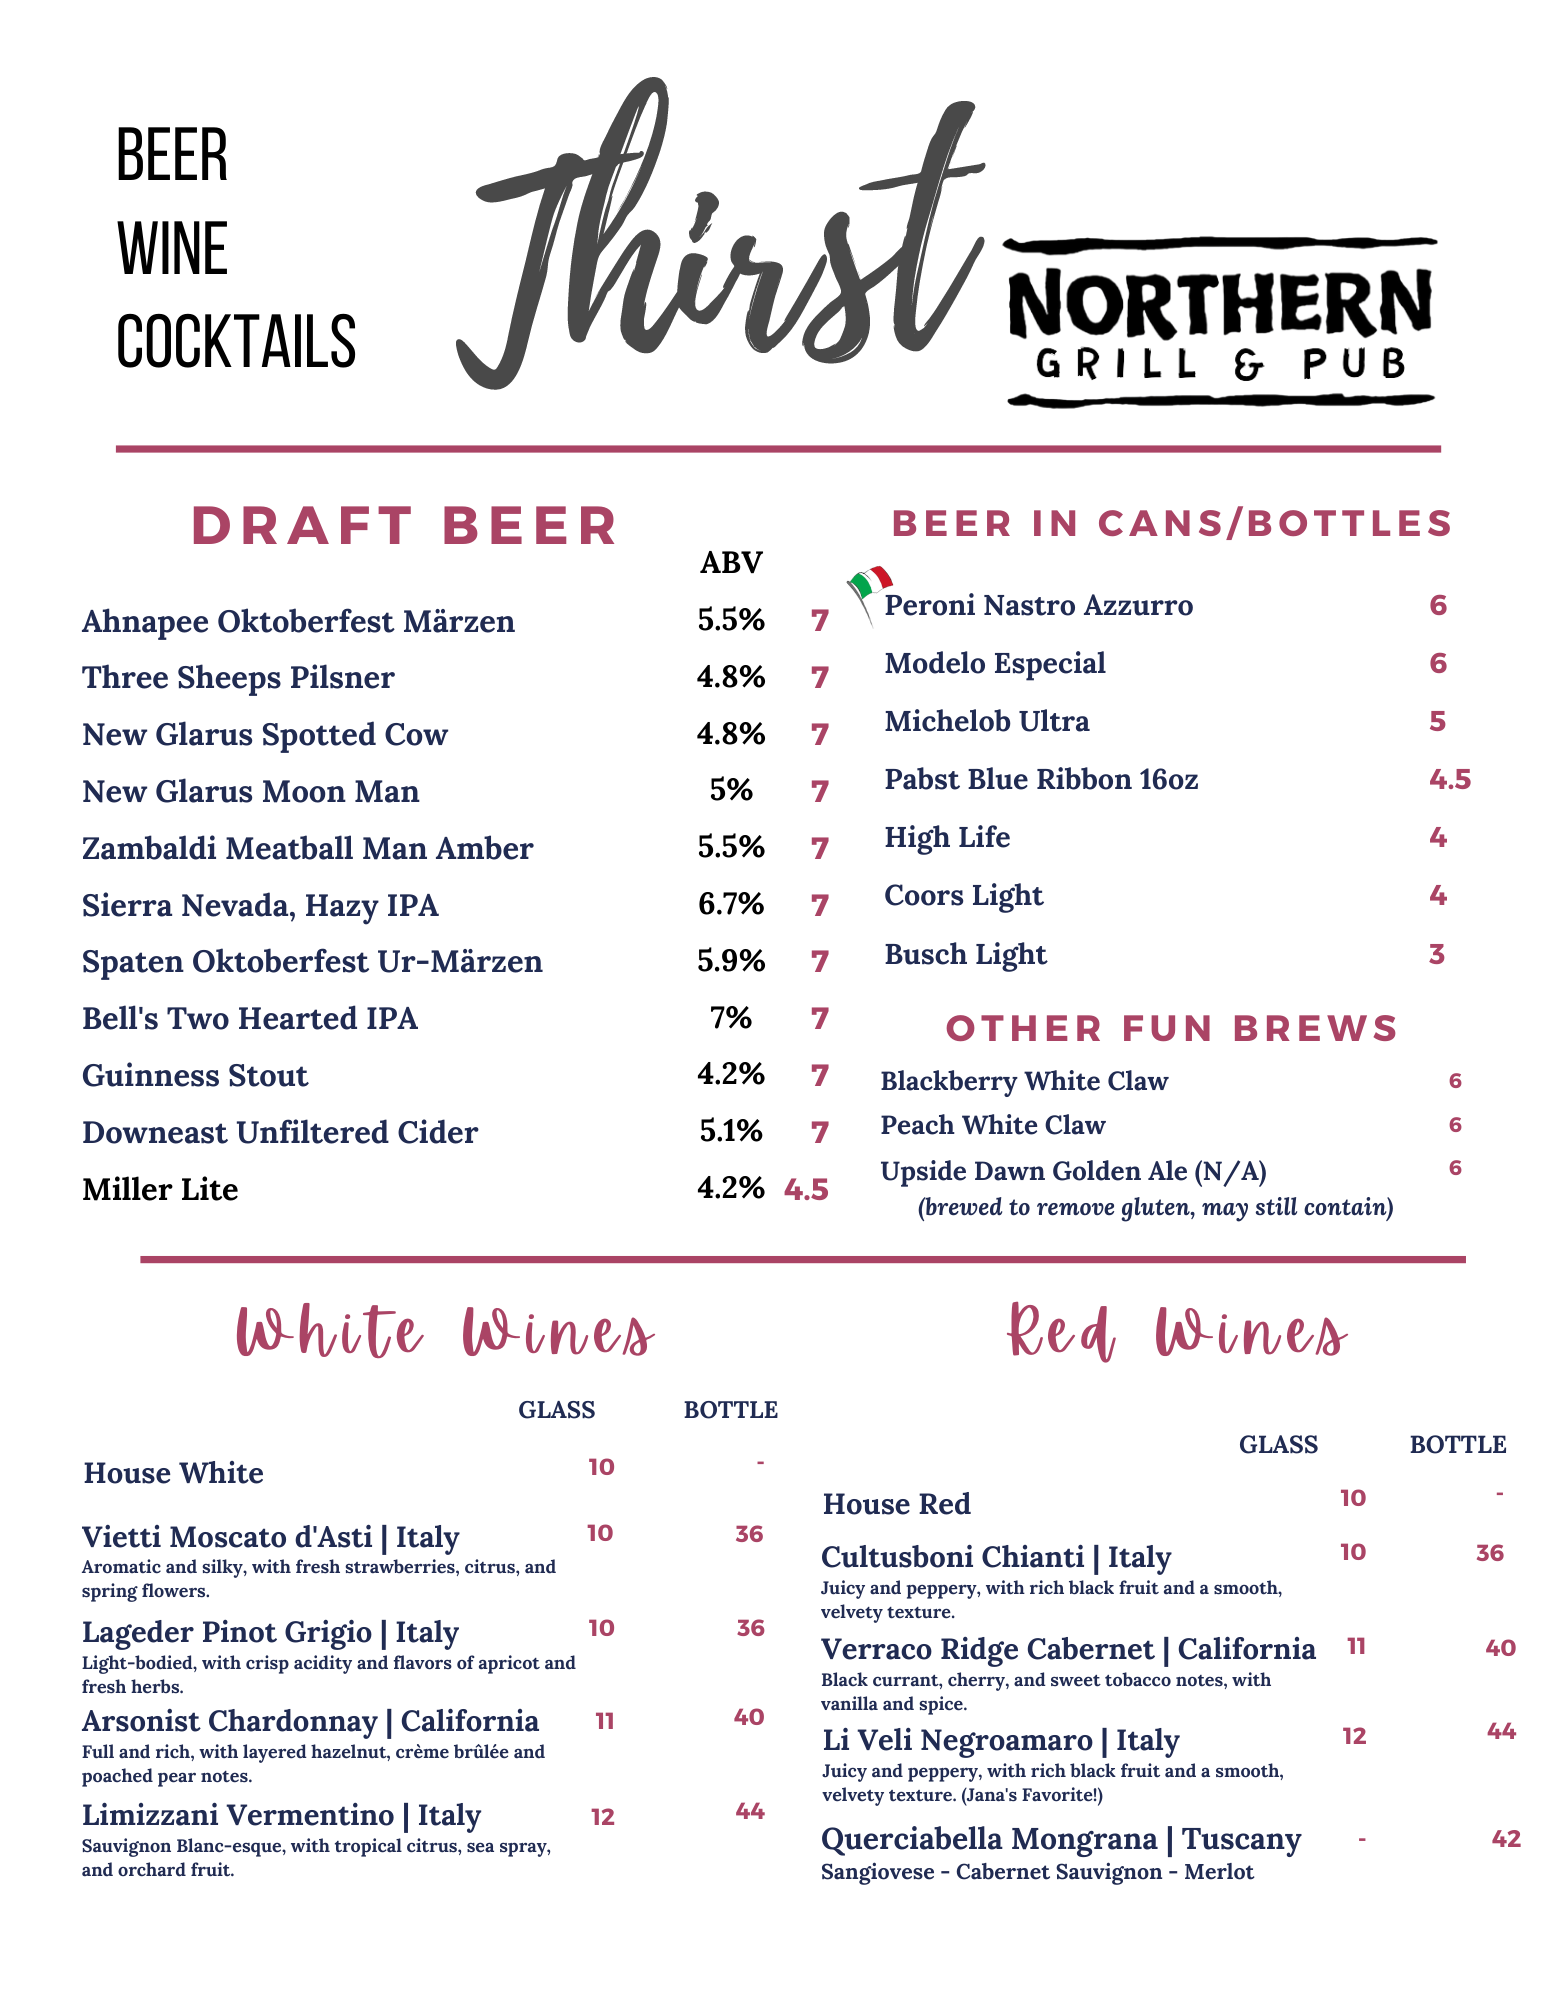 Northern Grill & Pub Adult Beverages#1